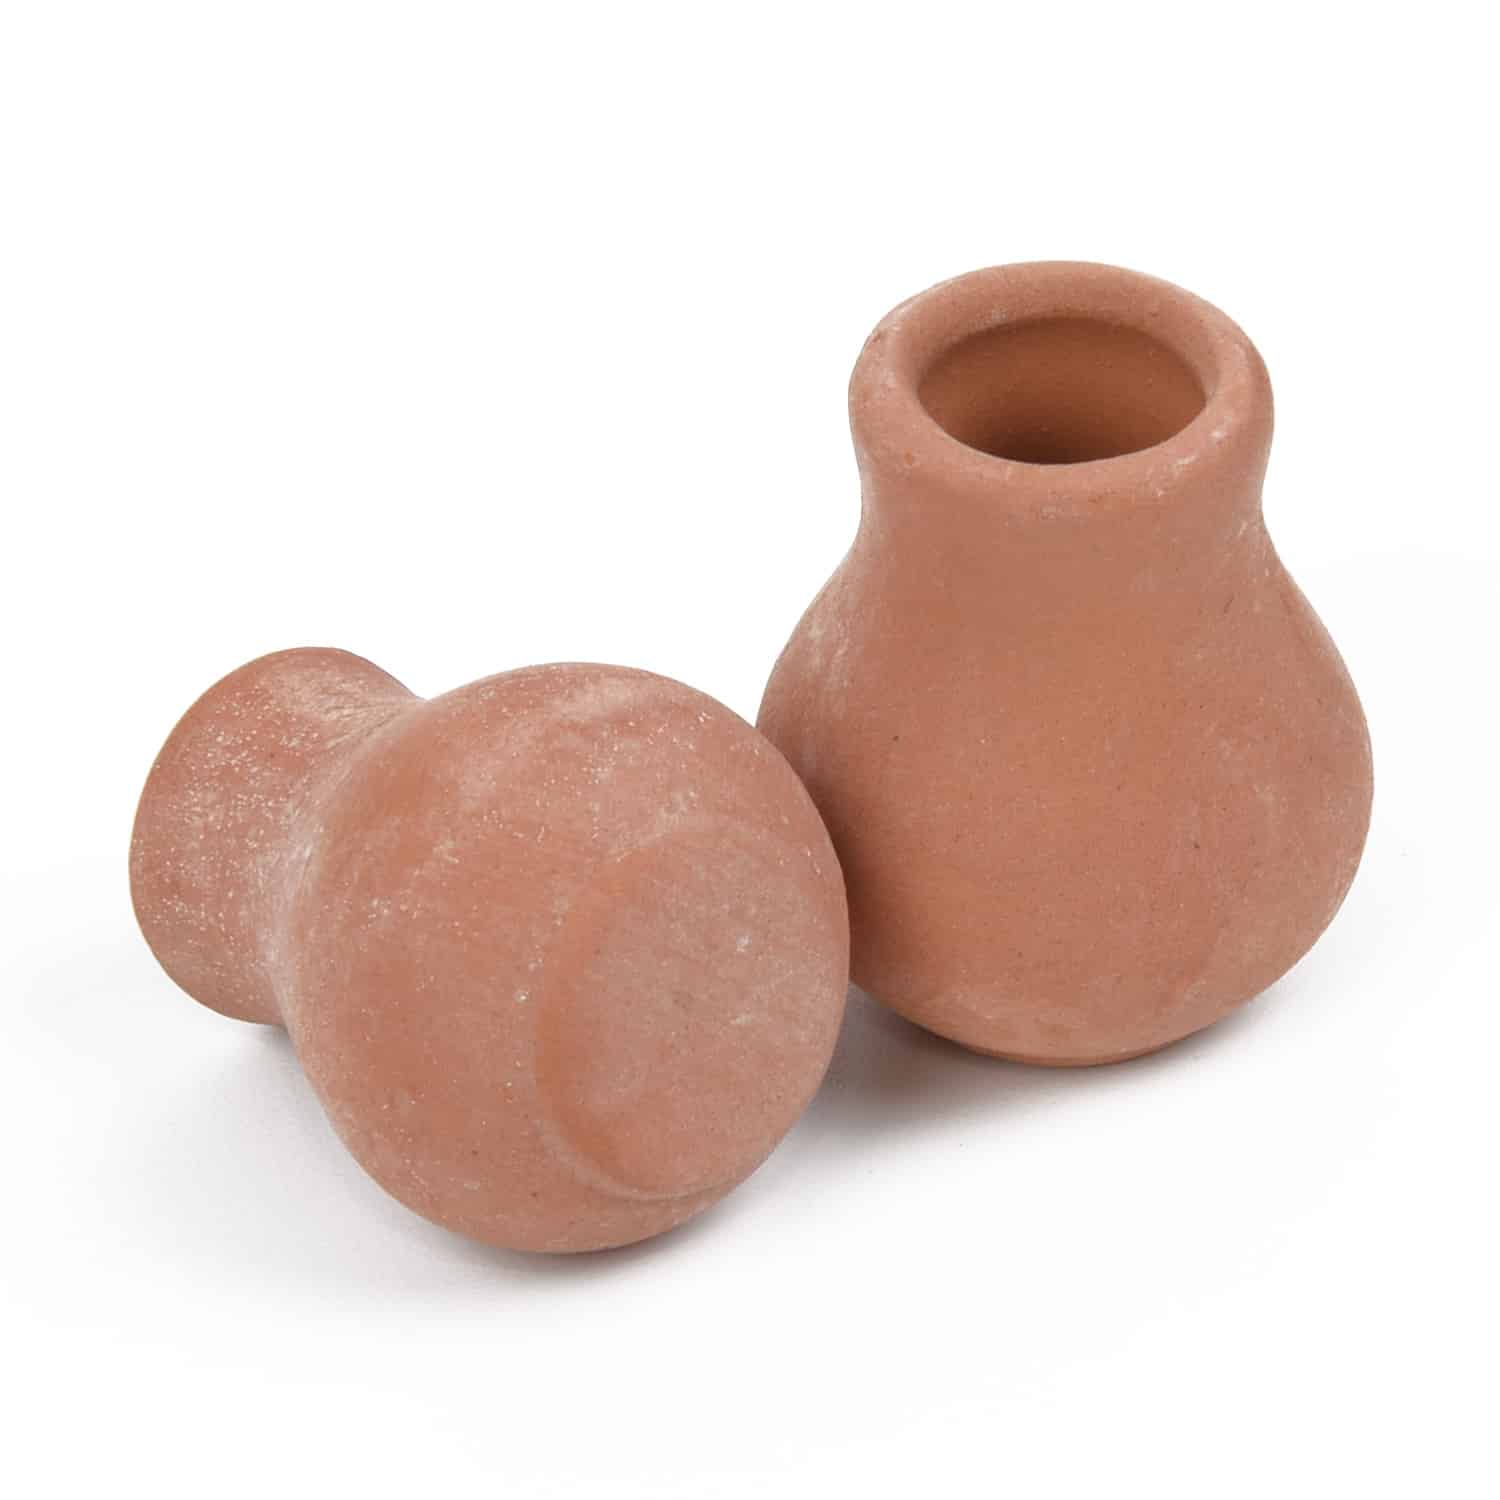 2PCS Mini Flower Pots Clay Plant Pot For Planter Wedding Decoration Craft The Real Color Of 2